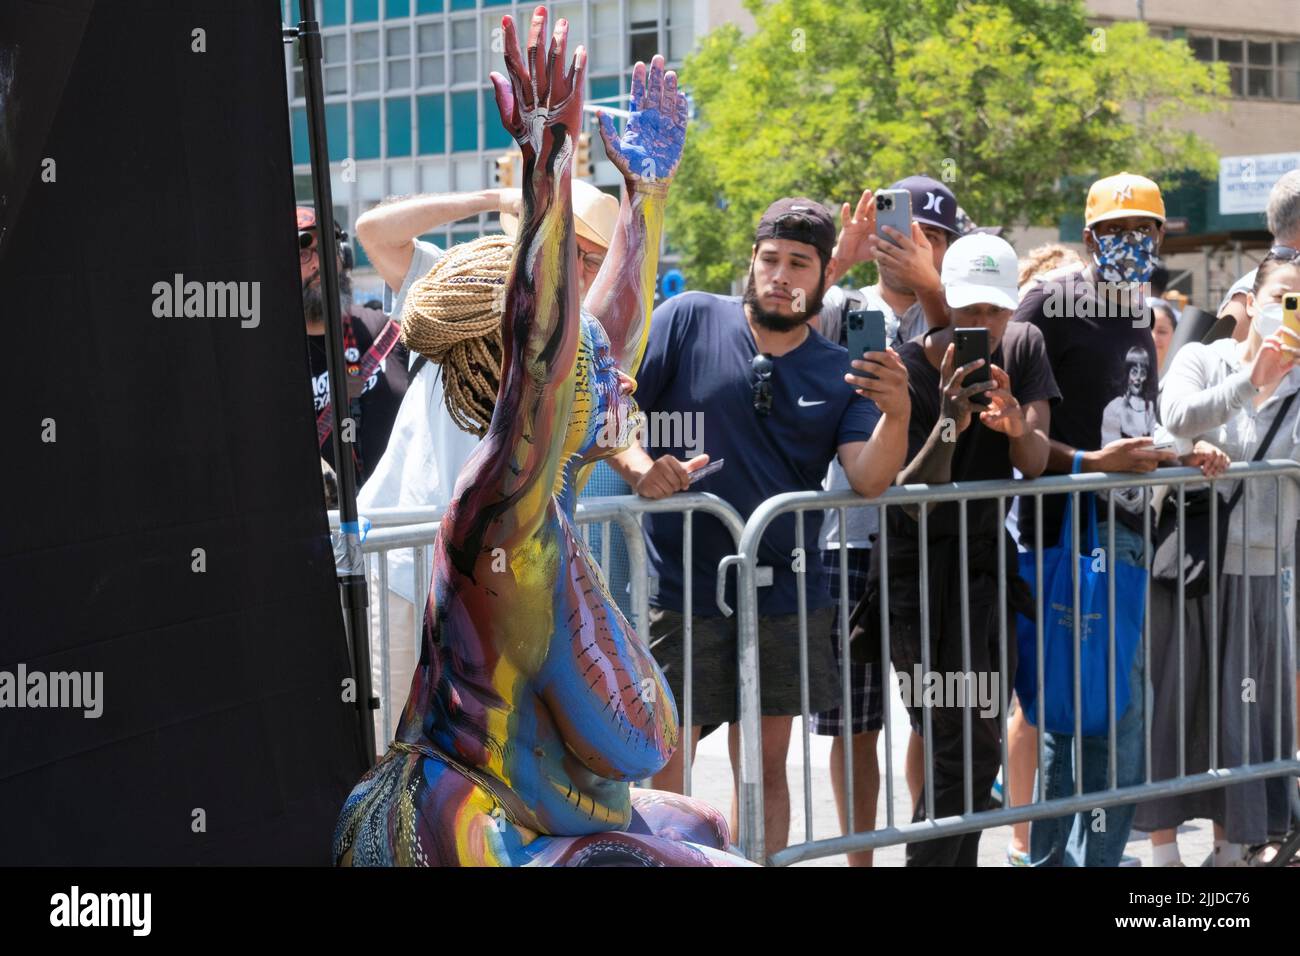 An attractive pus size woman poses after a full body painting at an event in Union Square Park in Manhattan, New York. Stock Photo